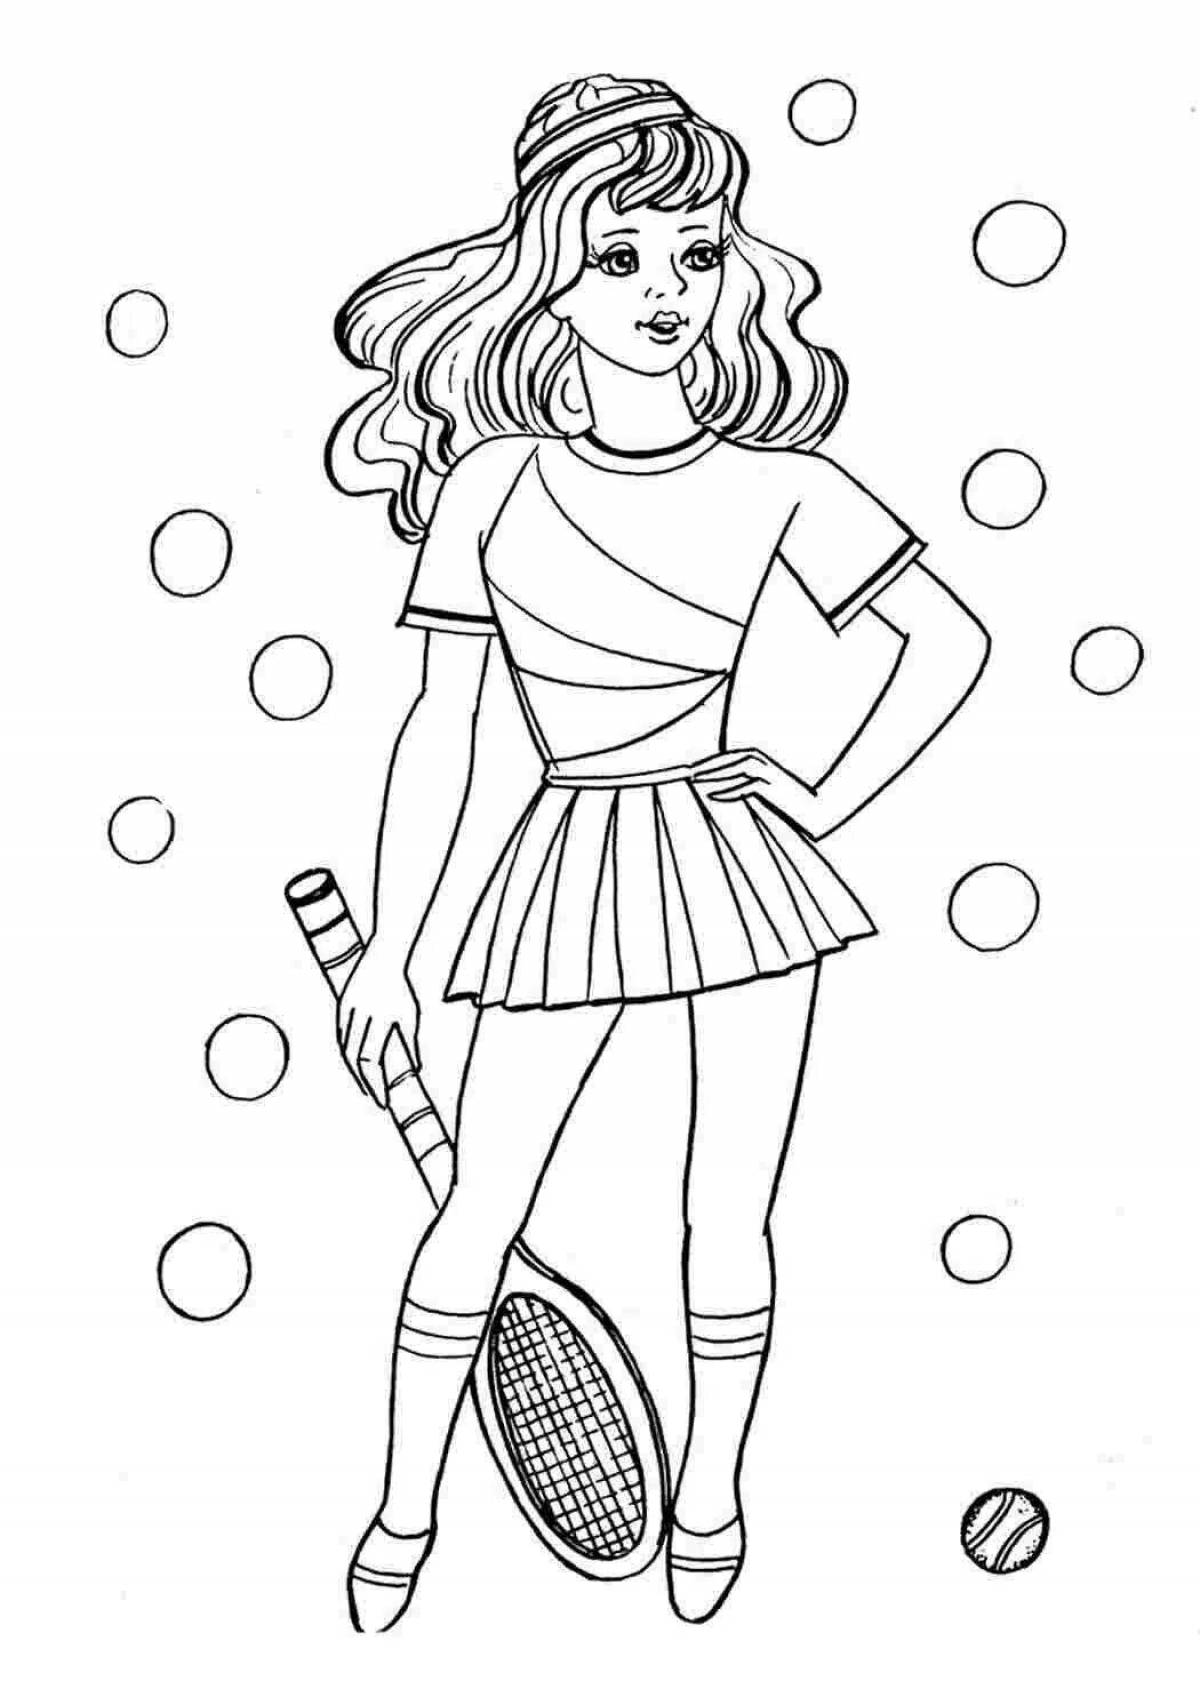 Fun coloring page 11 for girls